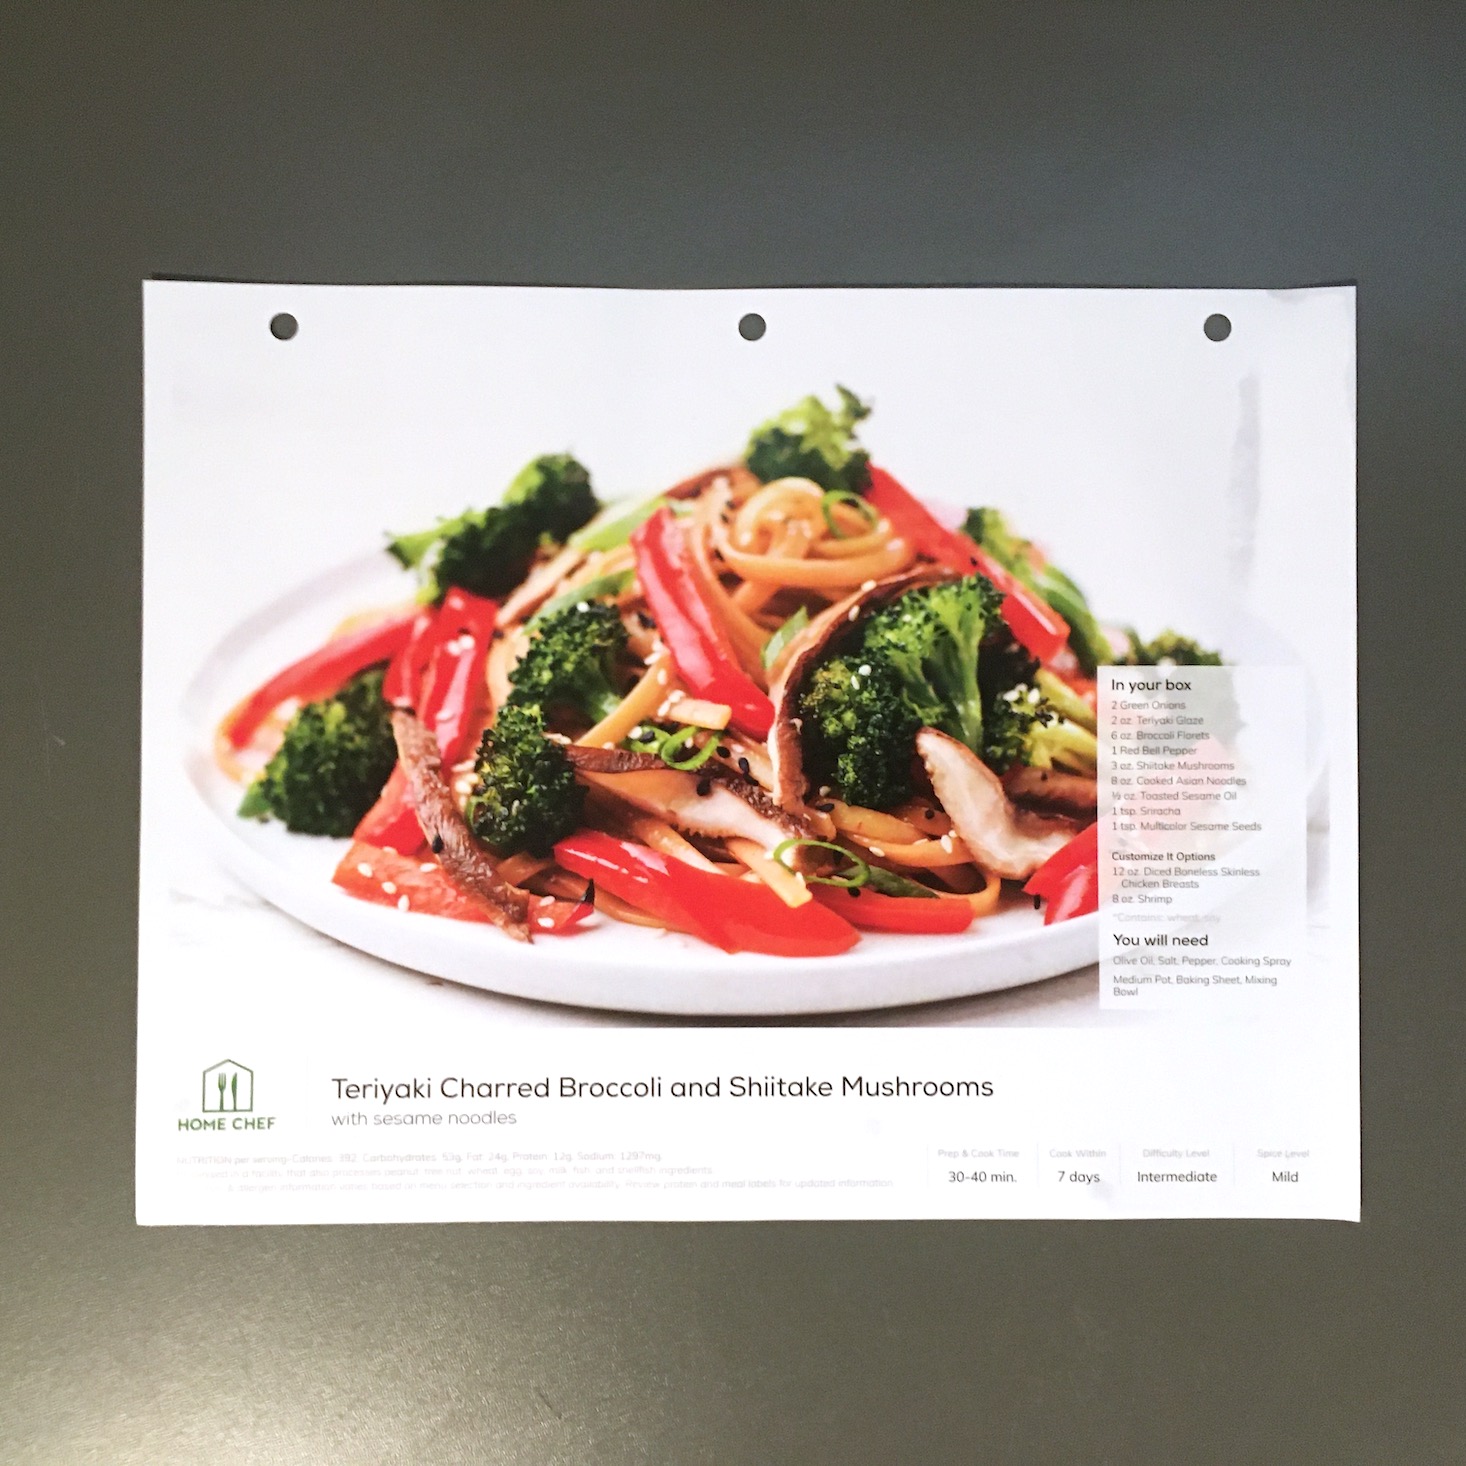 teriyaki noodles recipe card front showing plated dish